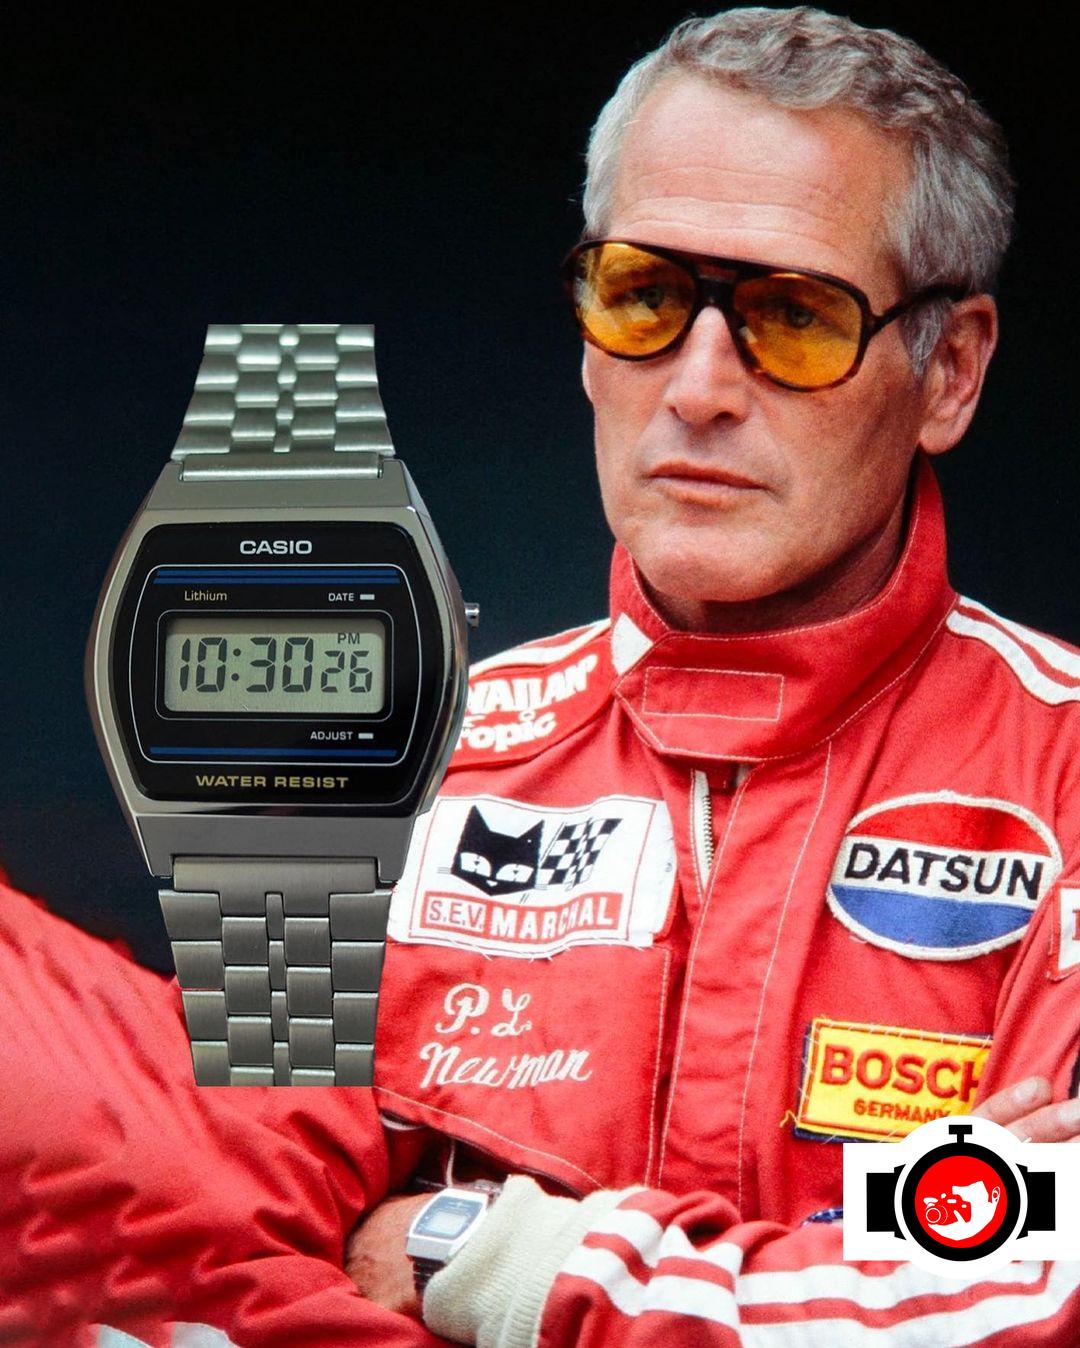 Paul Newman's Vintage Casio - The Timeless Tech Accessory in his Watch Collection